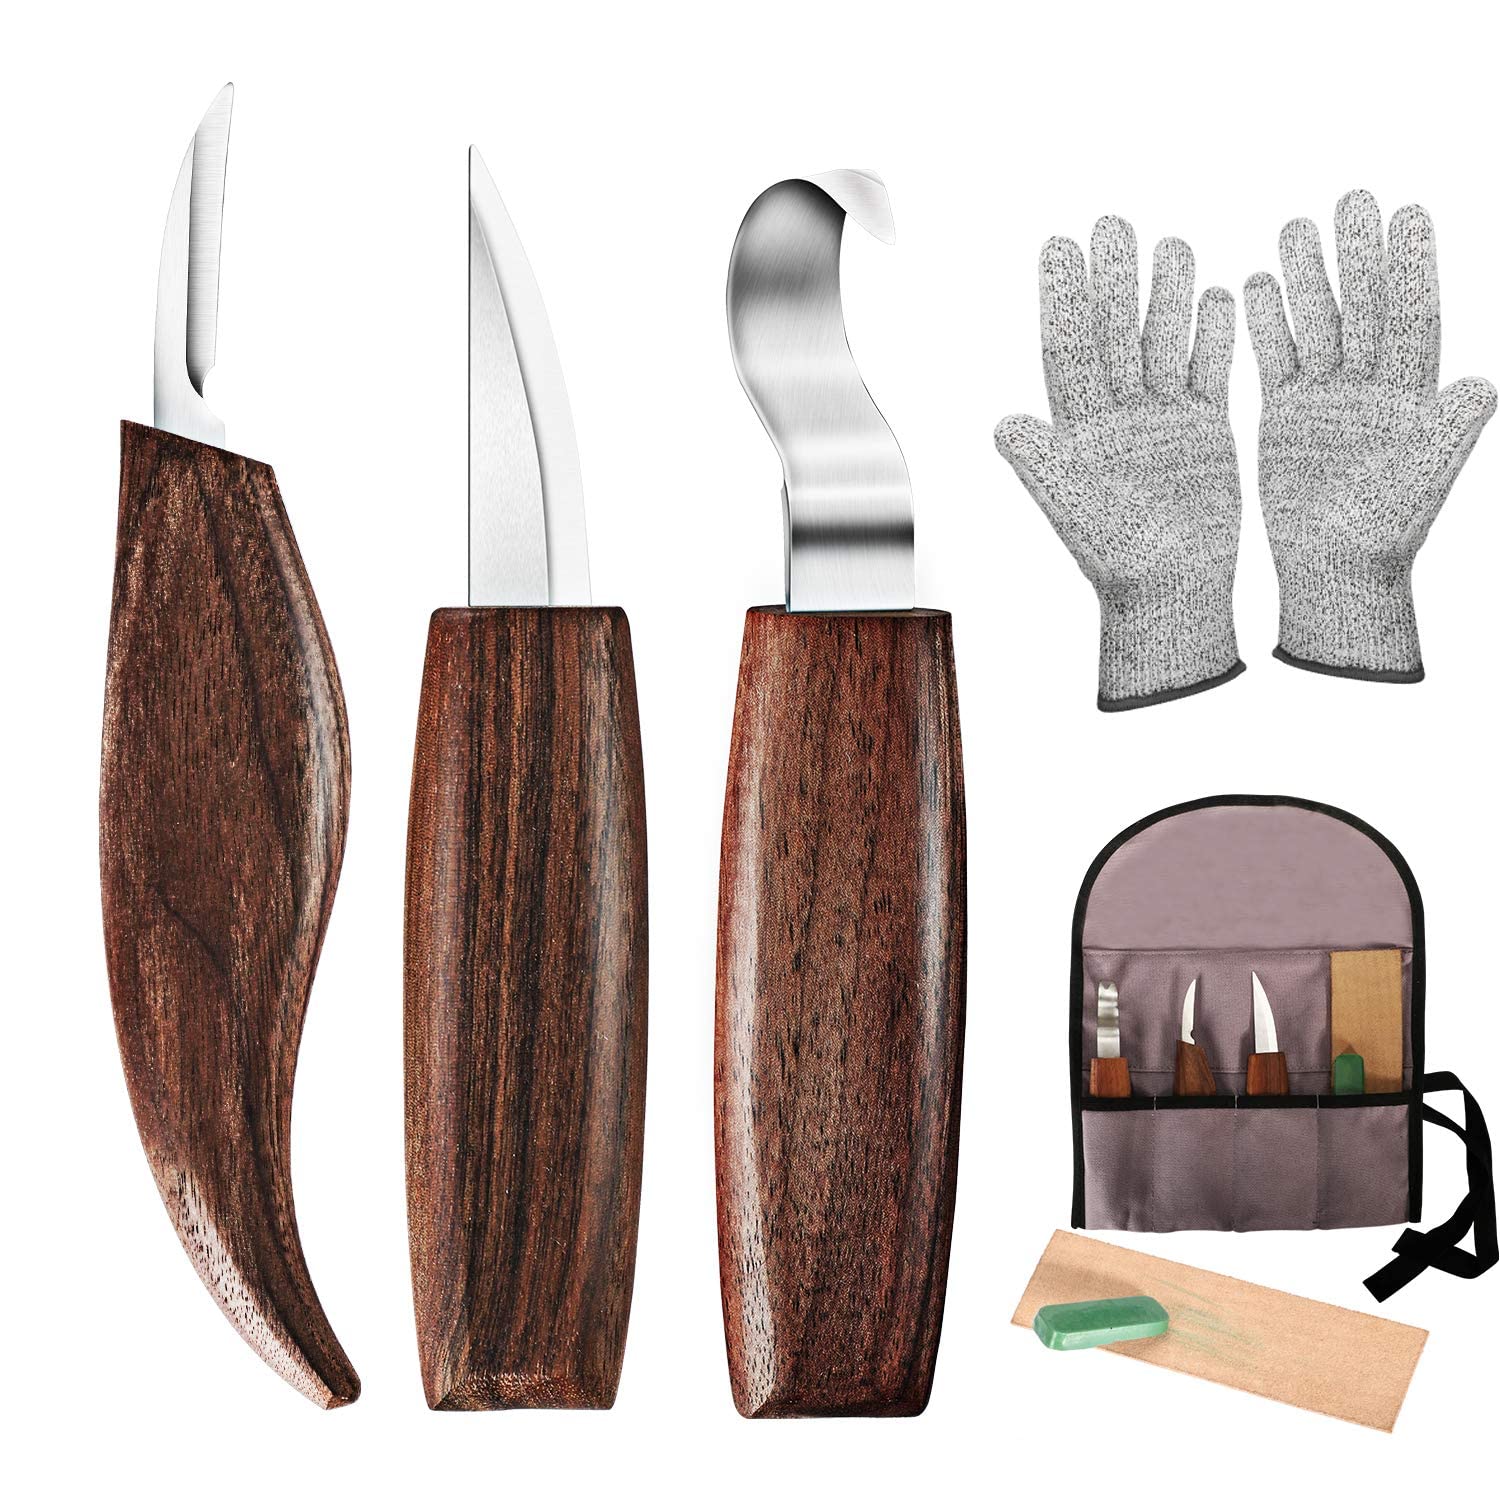  Wood Carving Kit for Beginners Wood Carving Tools Kids Adults,  Carving Knife Set with 5pcs Wood Carving Knives,3blocks,Anti-Slip  Cut-Resistant Gloves, Woodworking DIY Pendant for Gift : Arts, Crafts &  Sewing